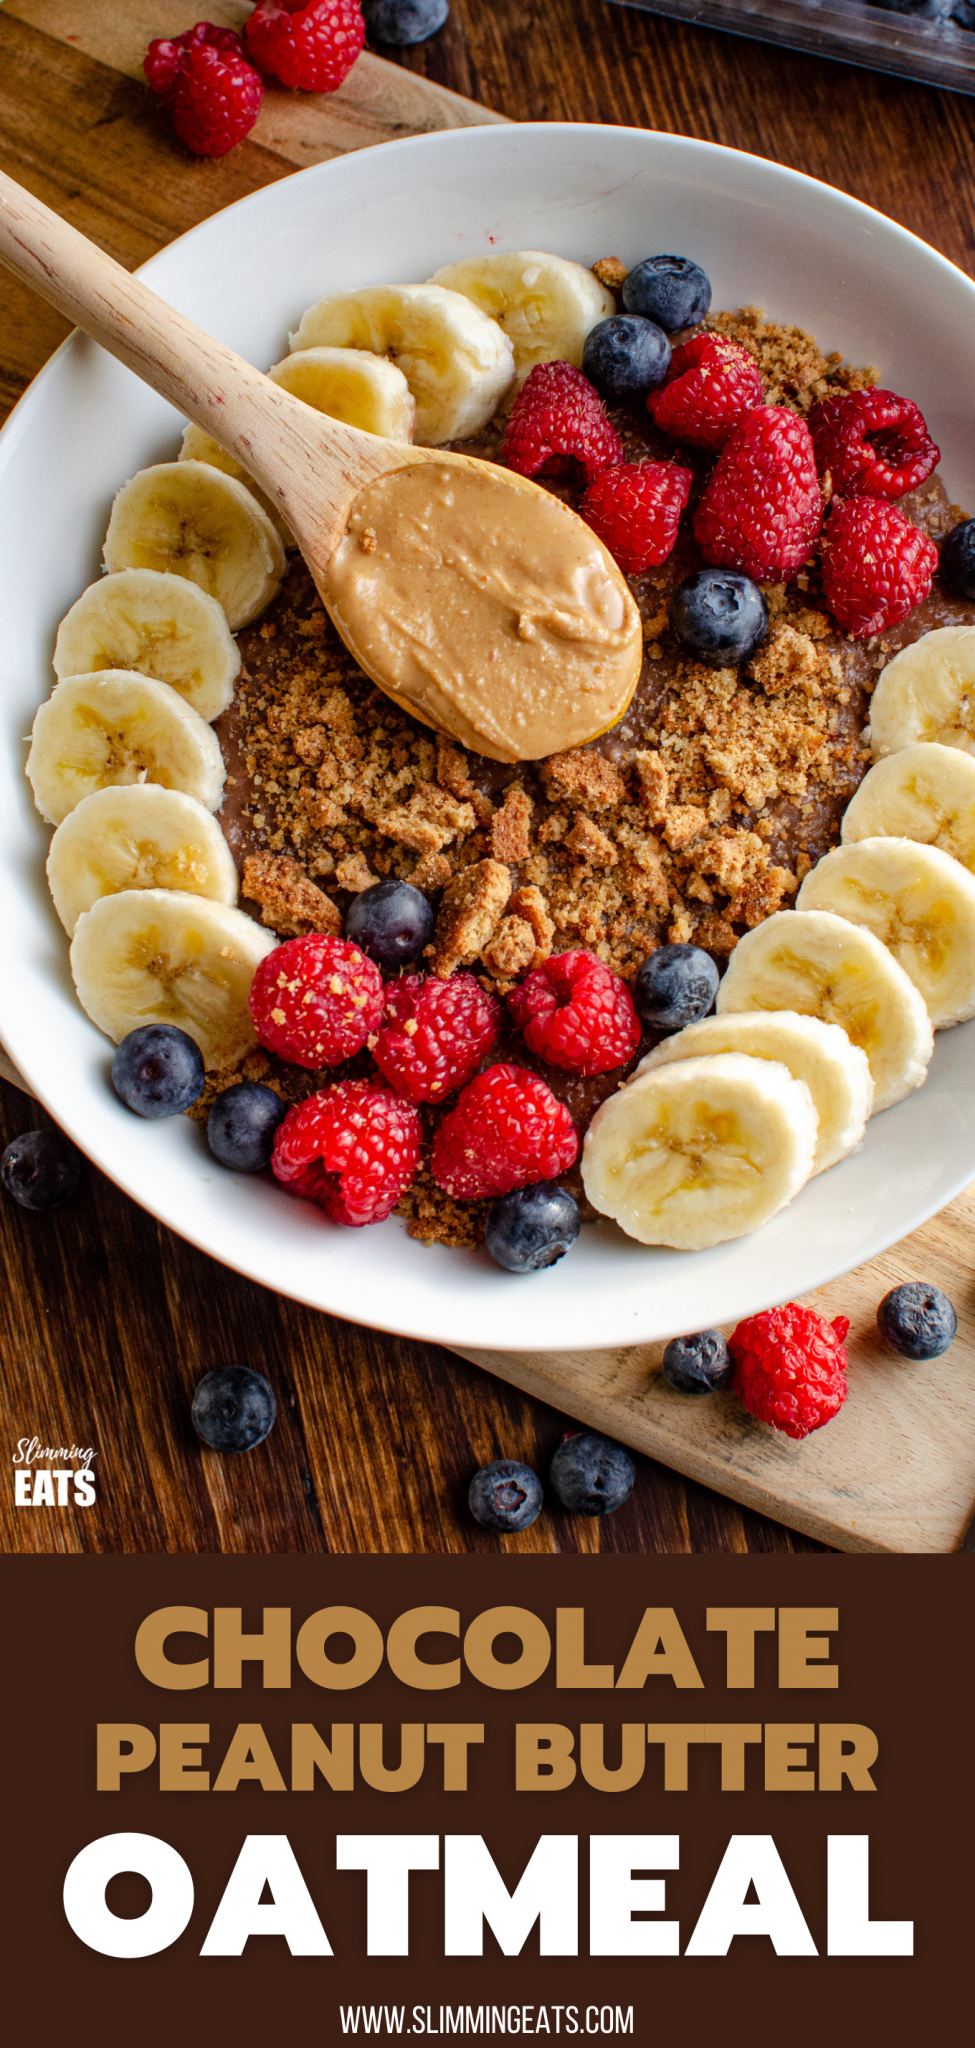 Chocolate Peanut Butter Oatmeal in white bowl with wooden spoon of peanut butter, slices of banana, raspberries, blueberries and a mini crumbled cookie